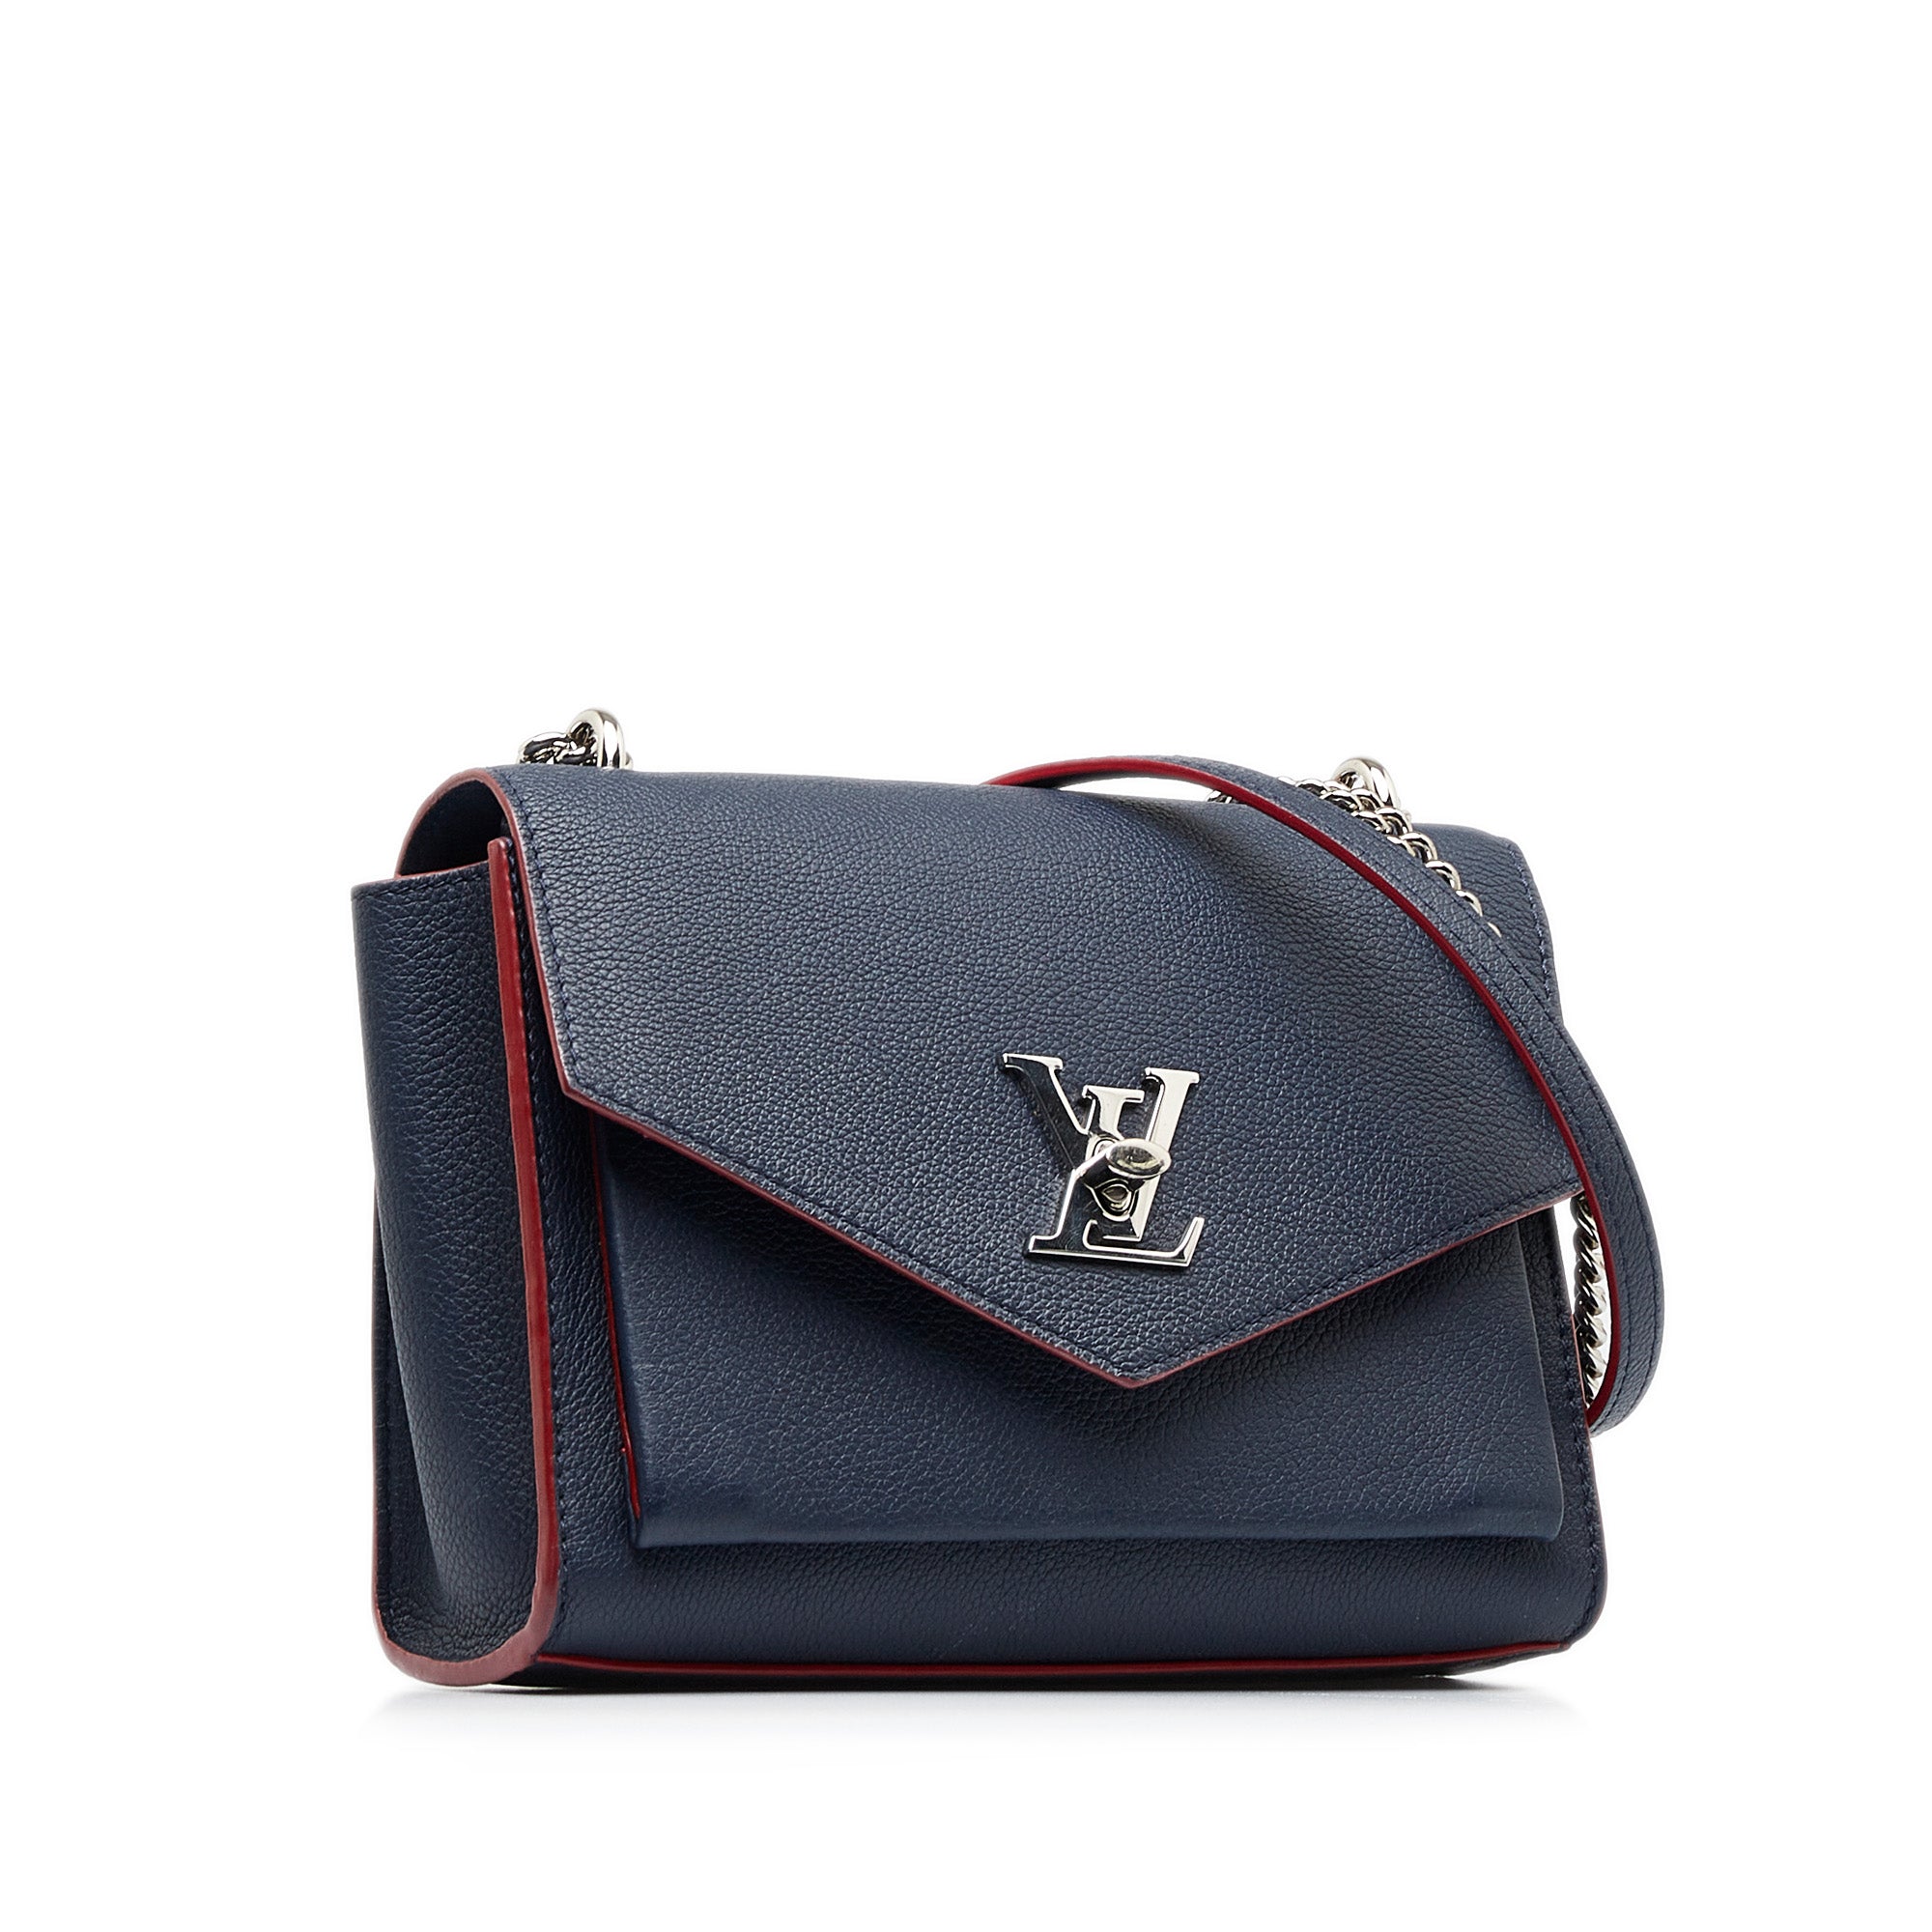 Louis Vuitton pre-owned red Leather Lockme II BB cross-body bag